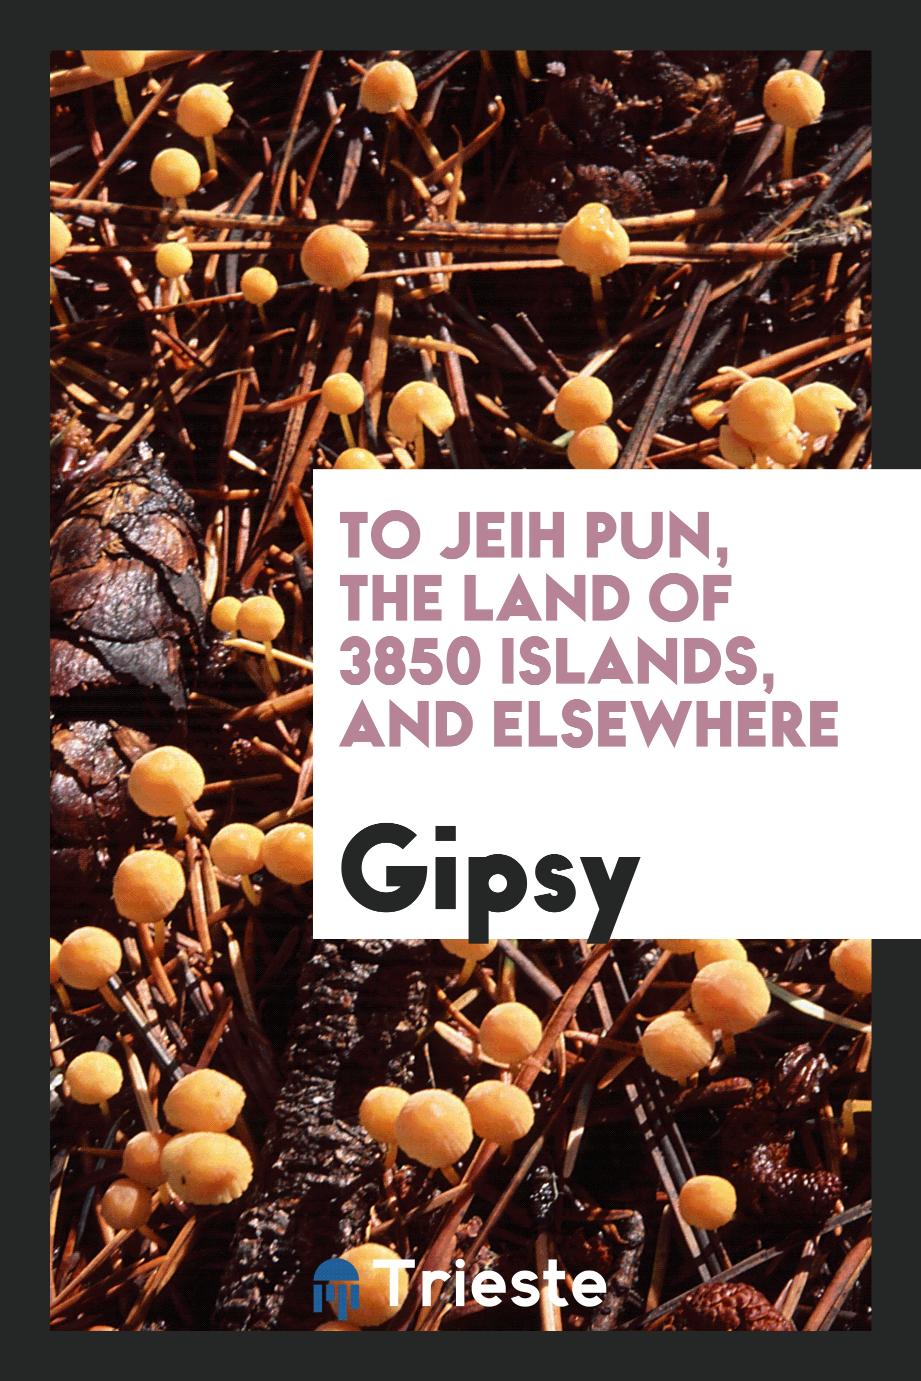 To Jeih Pun, the land of 3850 islands, and elsewhere